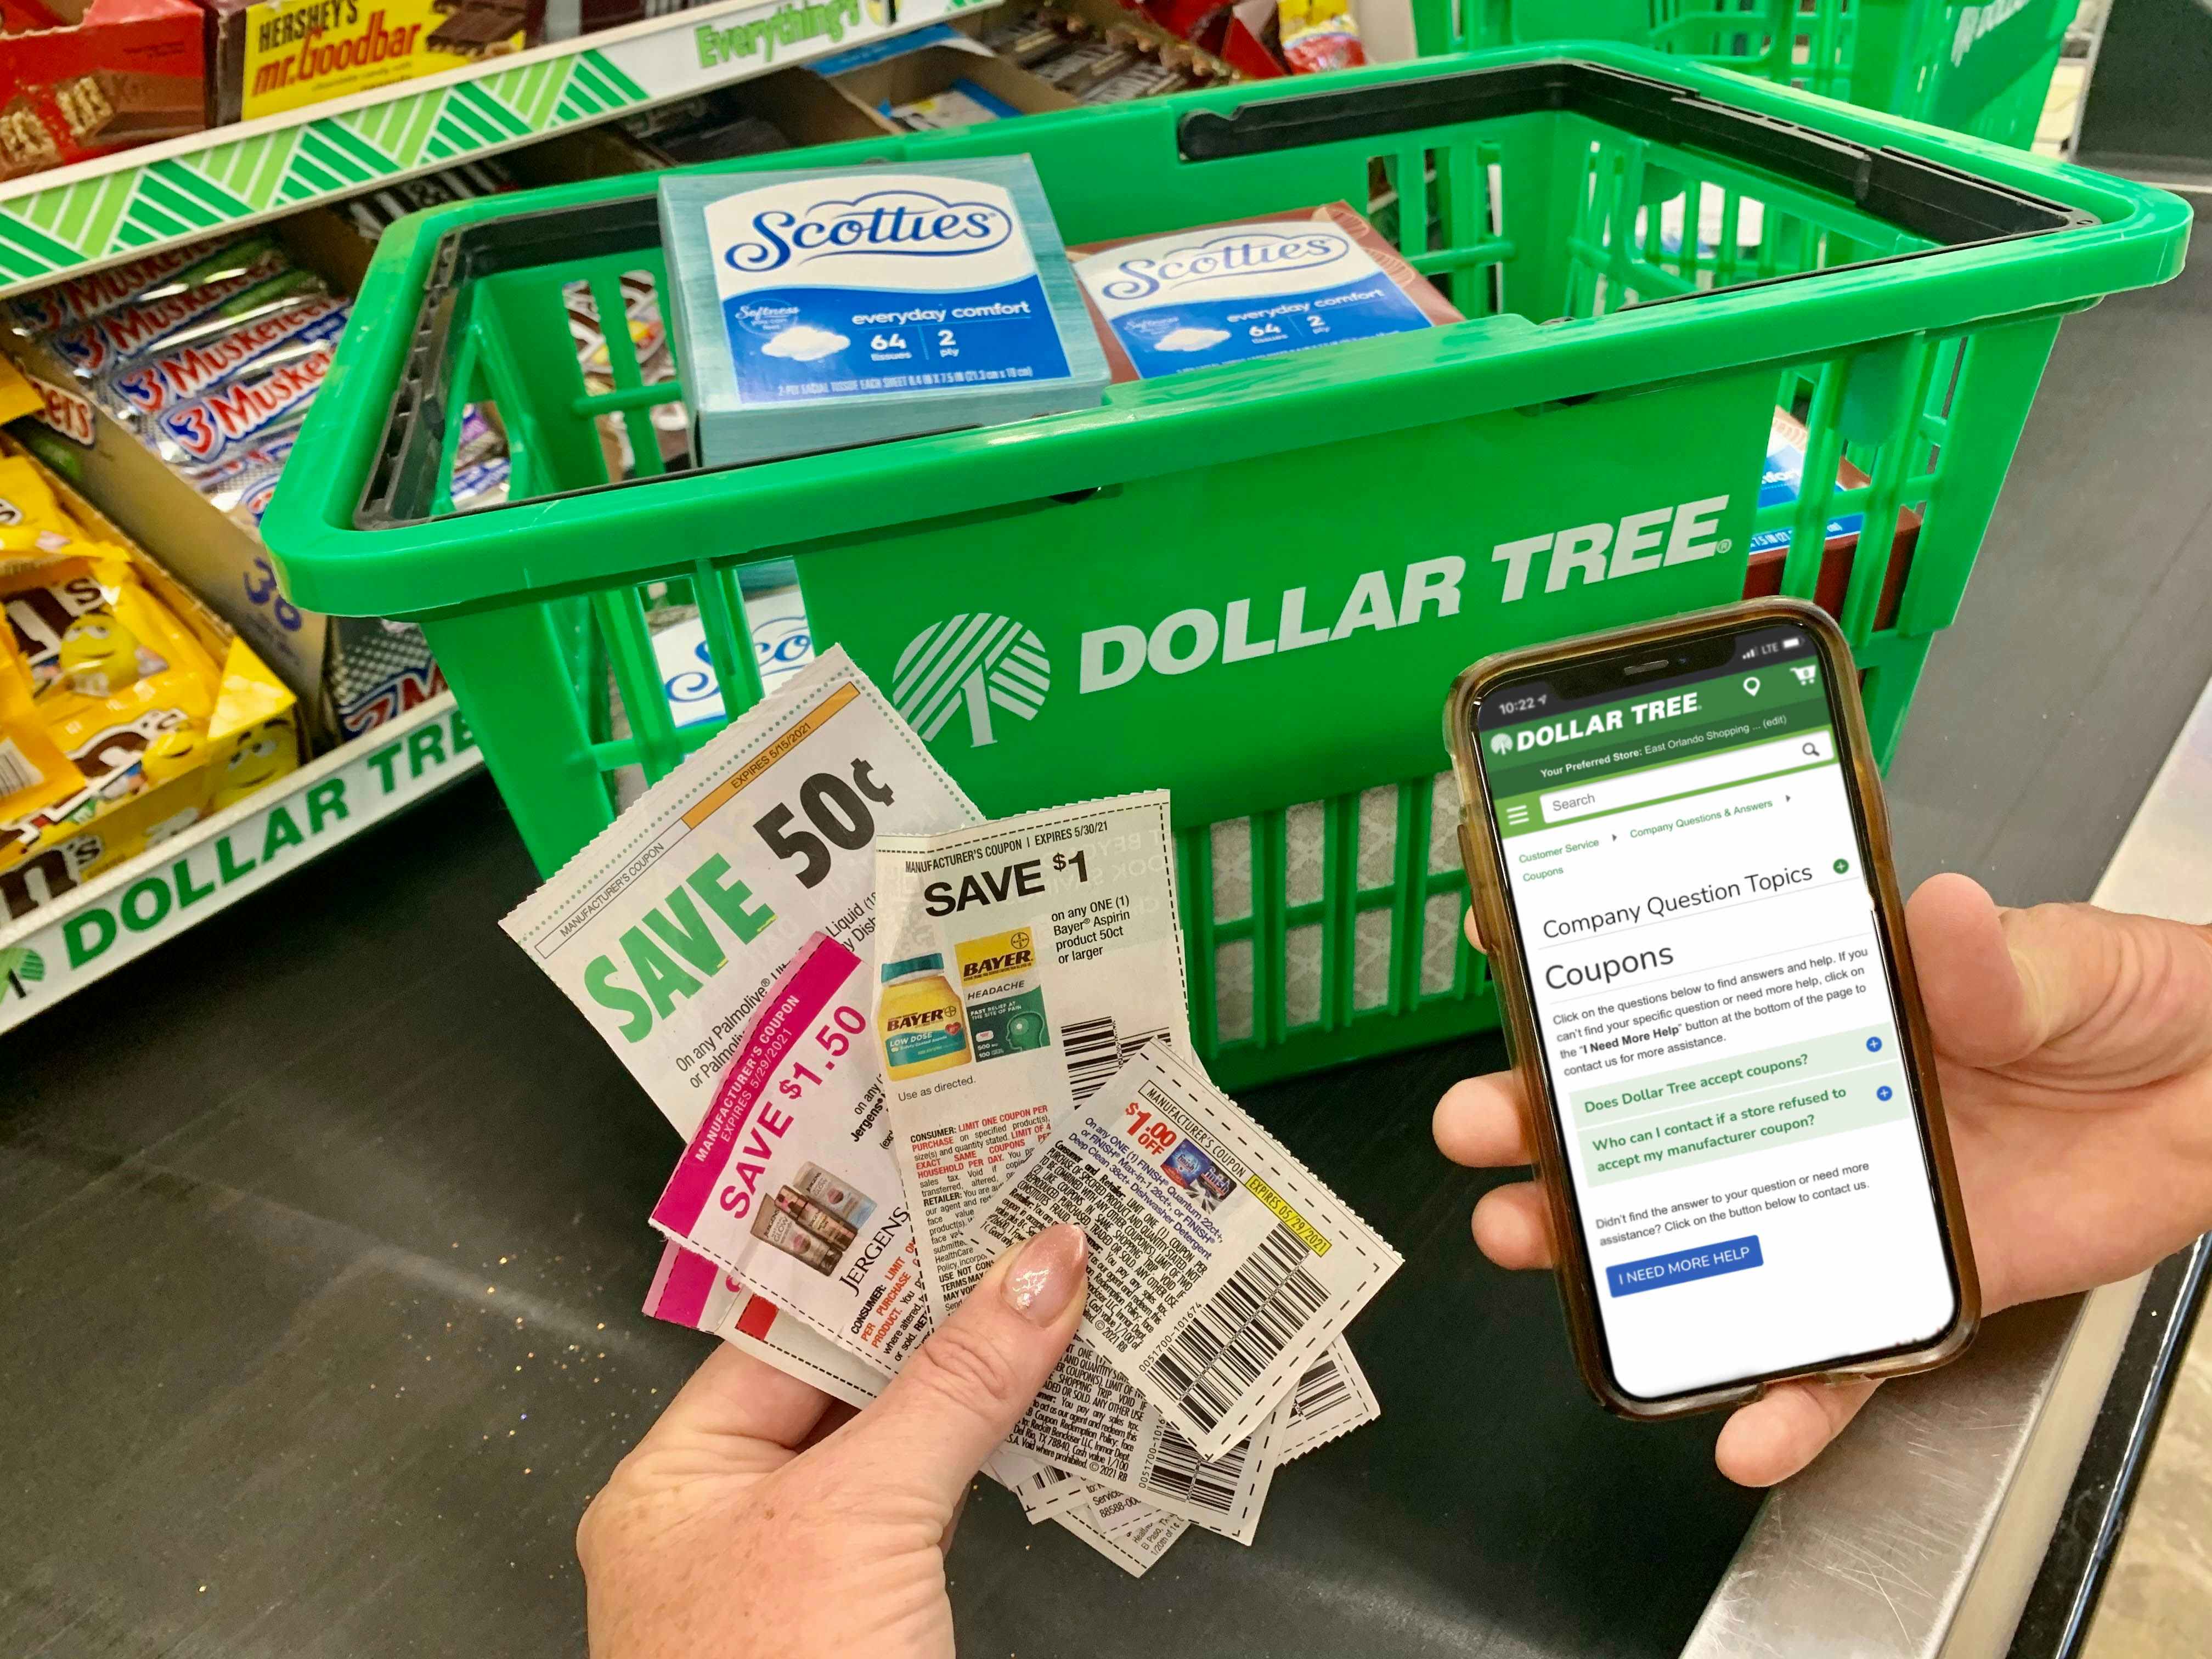 hands holding coupons and cellphone in front of shopping basket